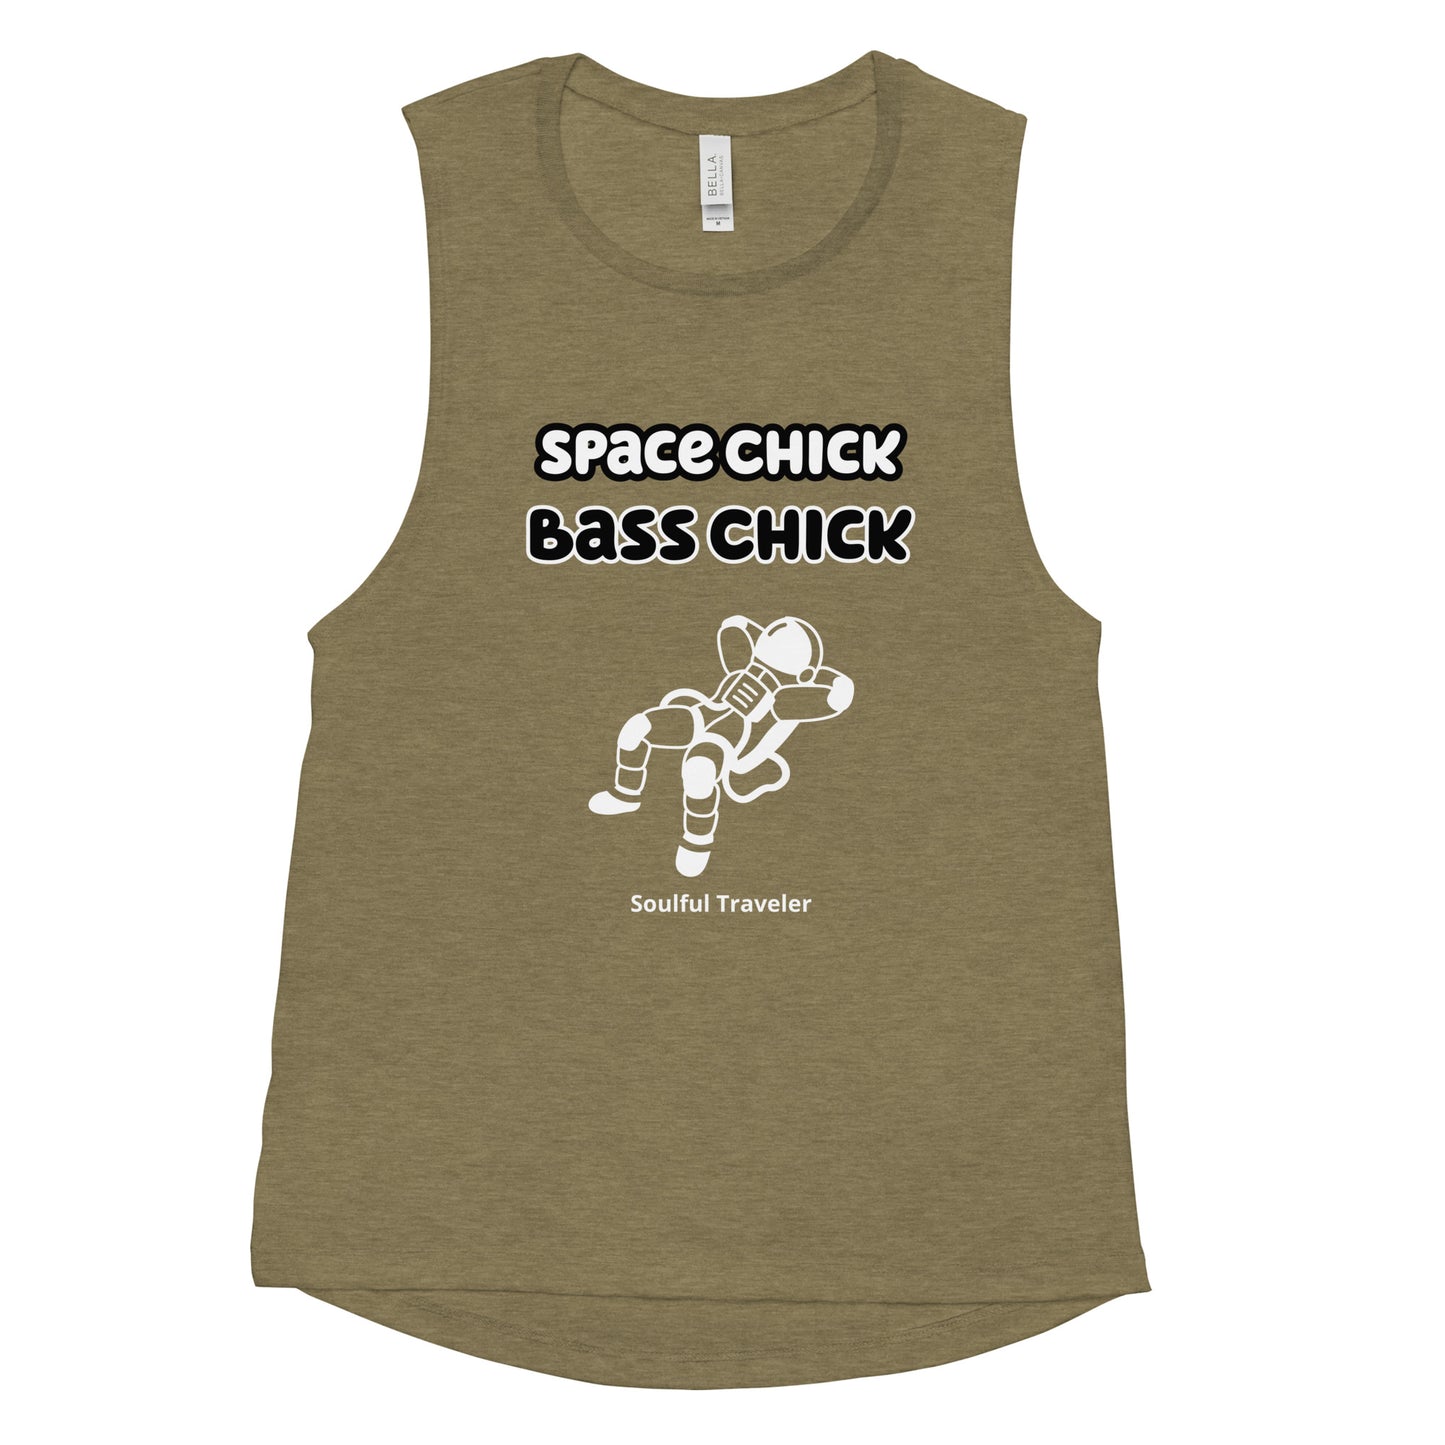 Space Chick Bass Chick Ladies’ Muscle Tank